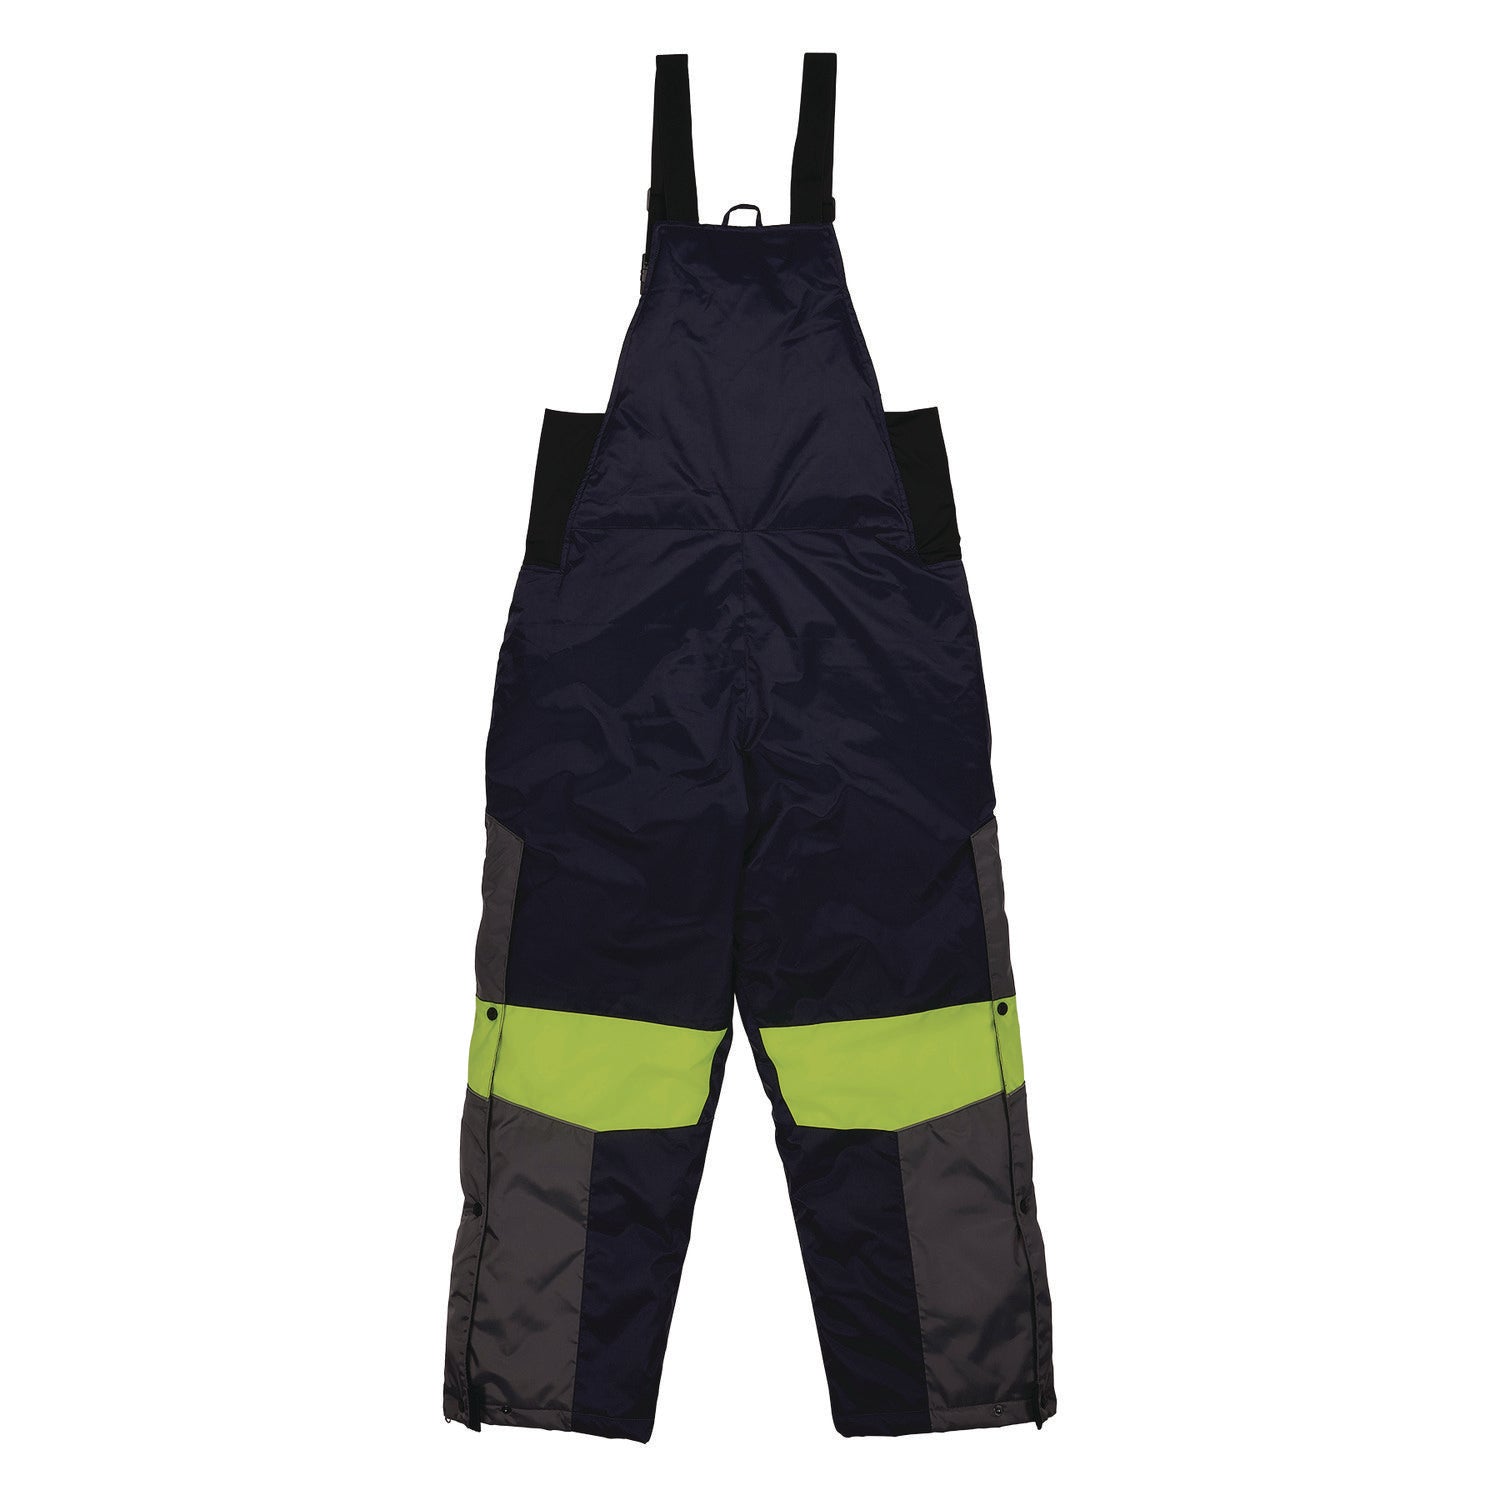 n-ferno-6477-insulated-cooler-bib-overall-x-small-navy-ships-in-1-3-business-days_ego41261 - 2